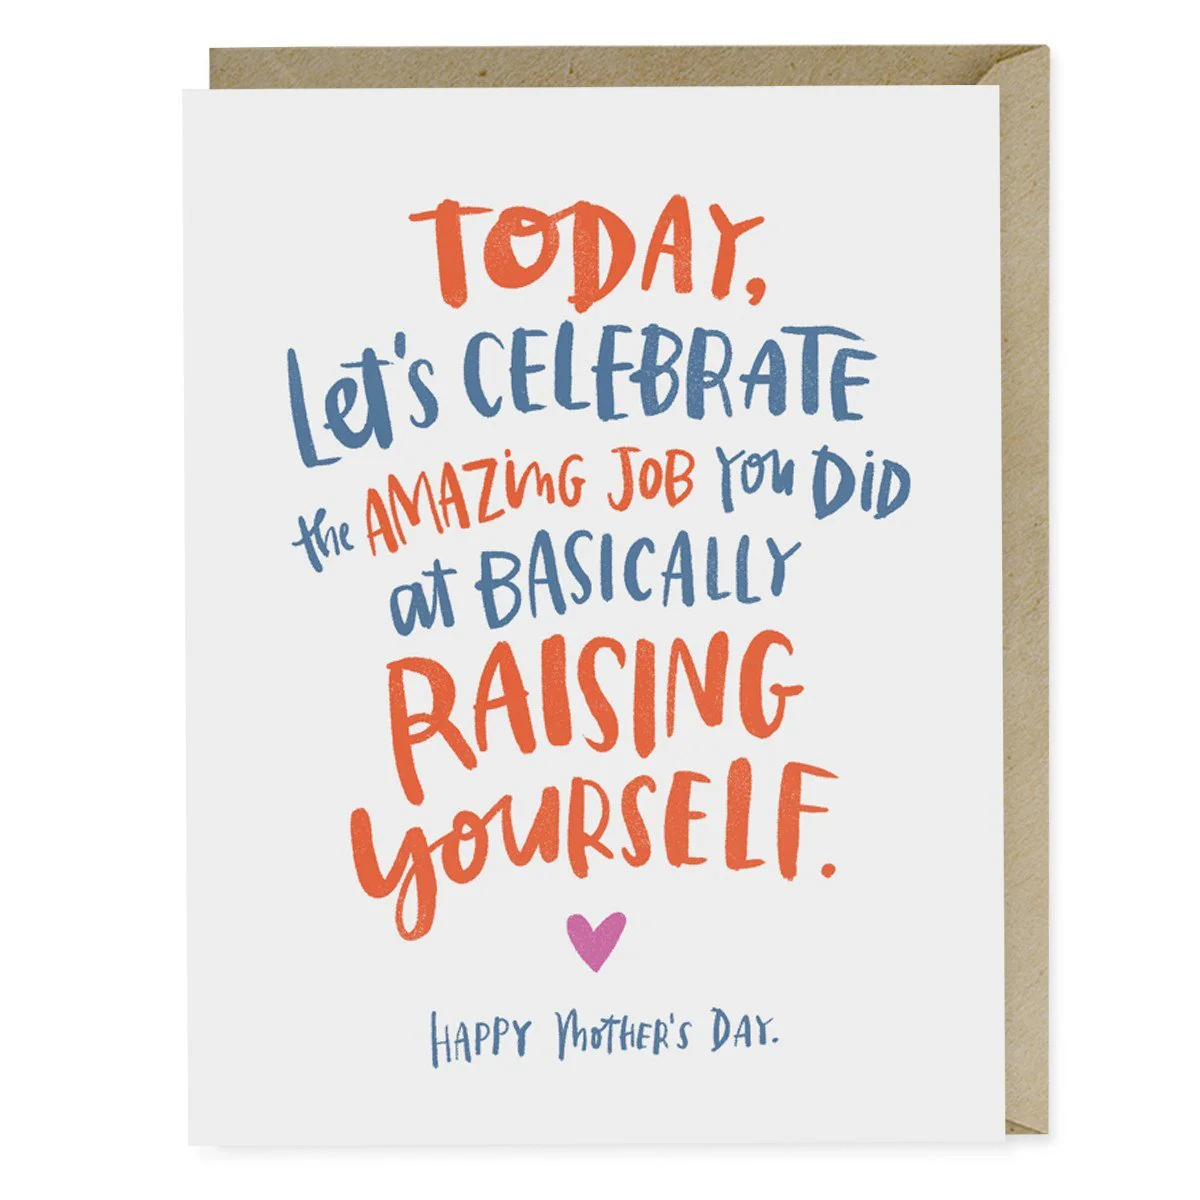 Raising Yourself Mother's Day Card by Em & Friends